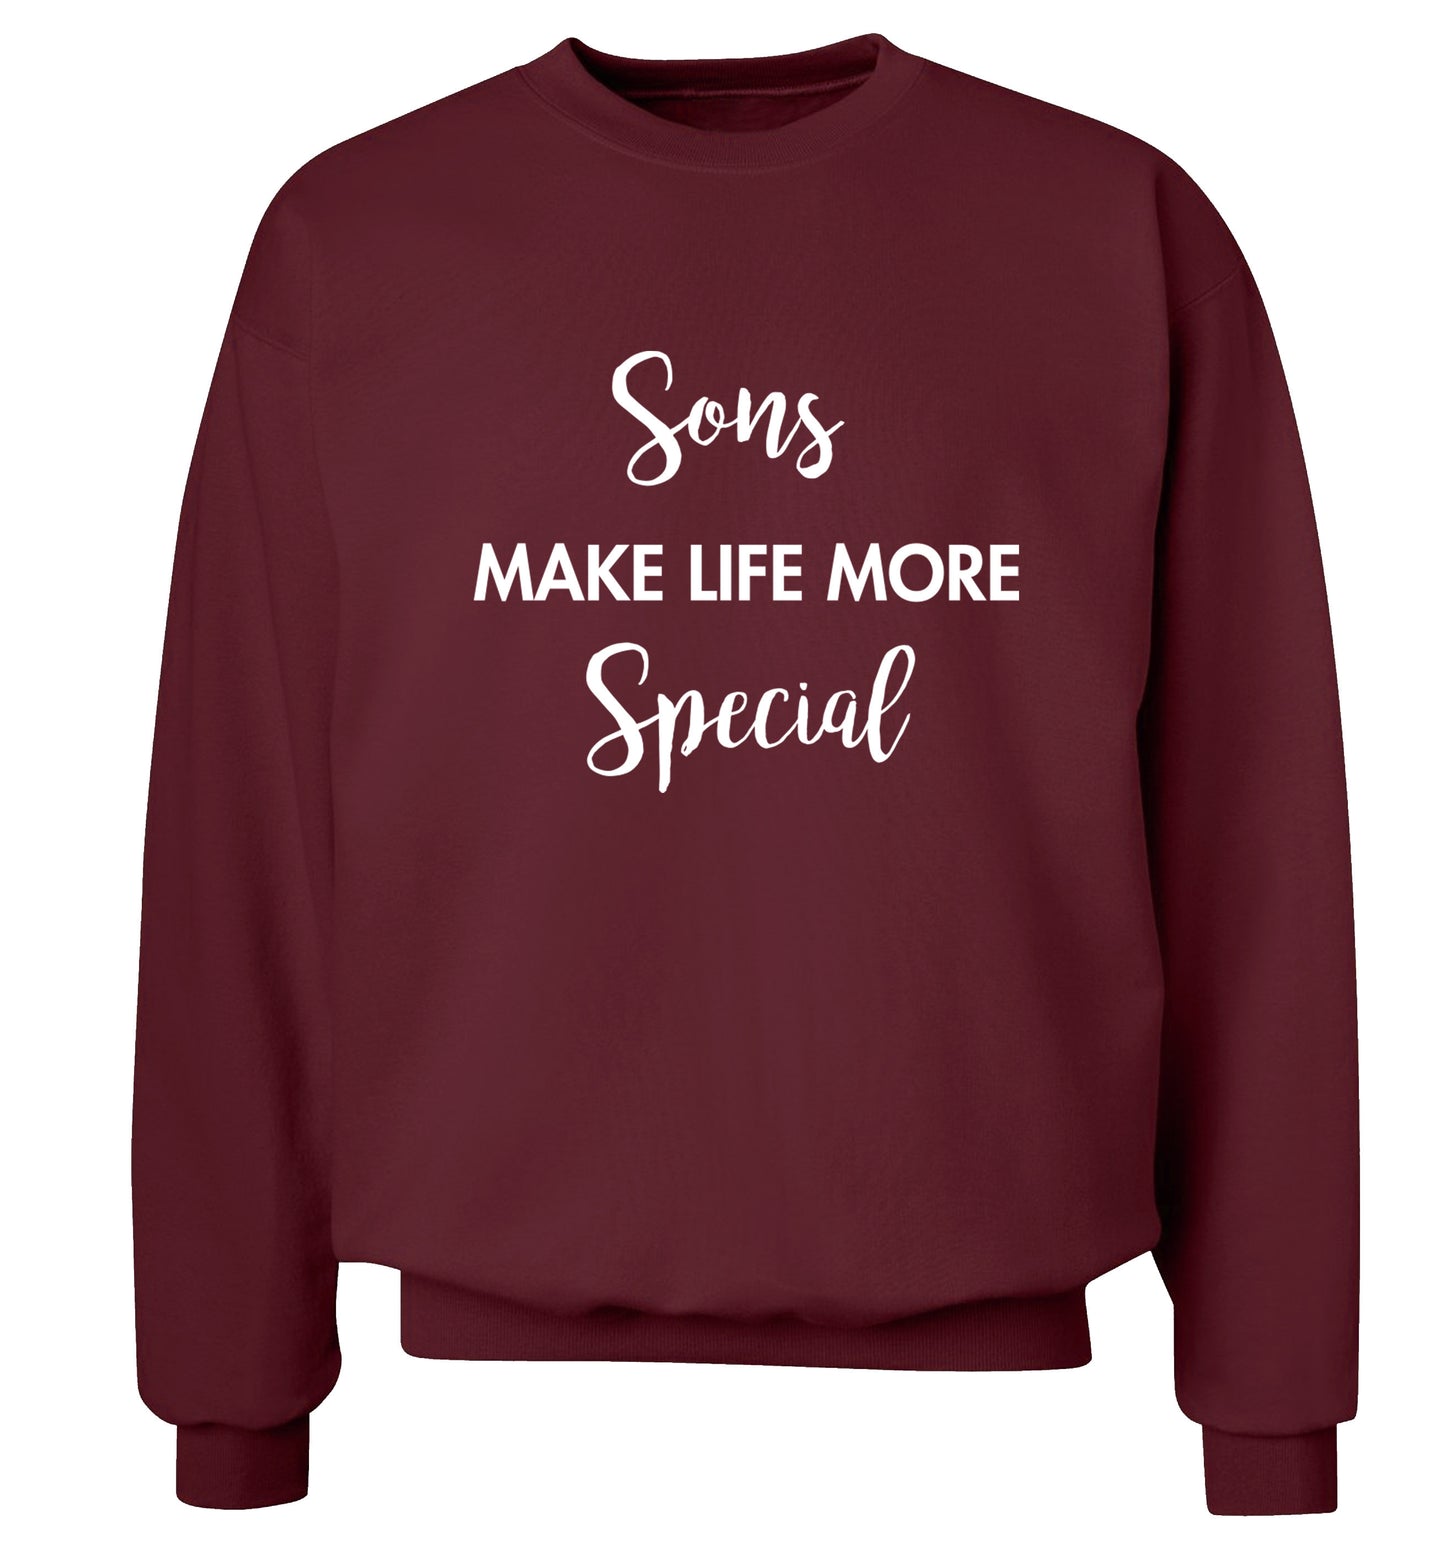 Sons make life more special Adult's unisex maroon Sweater 2XL